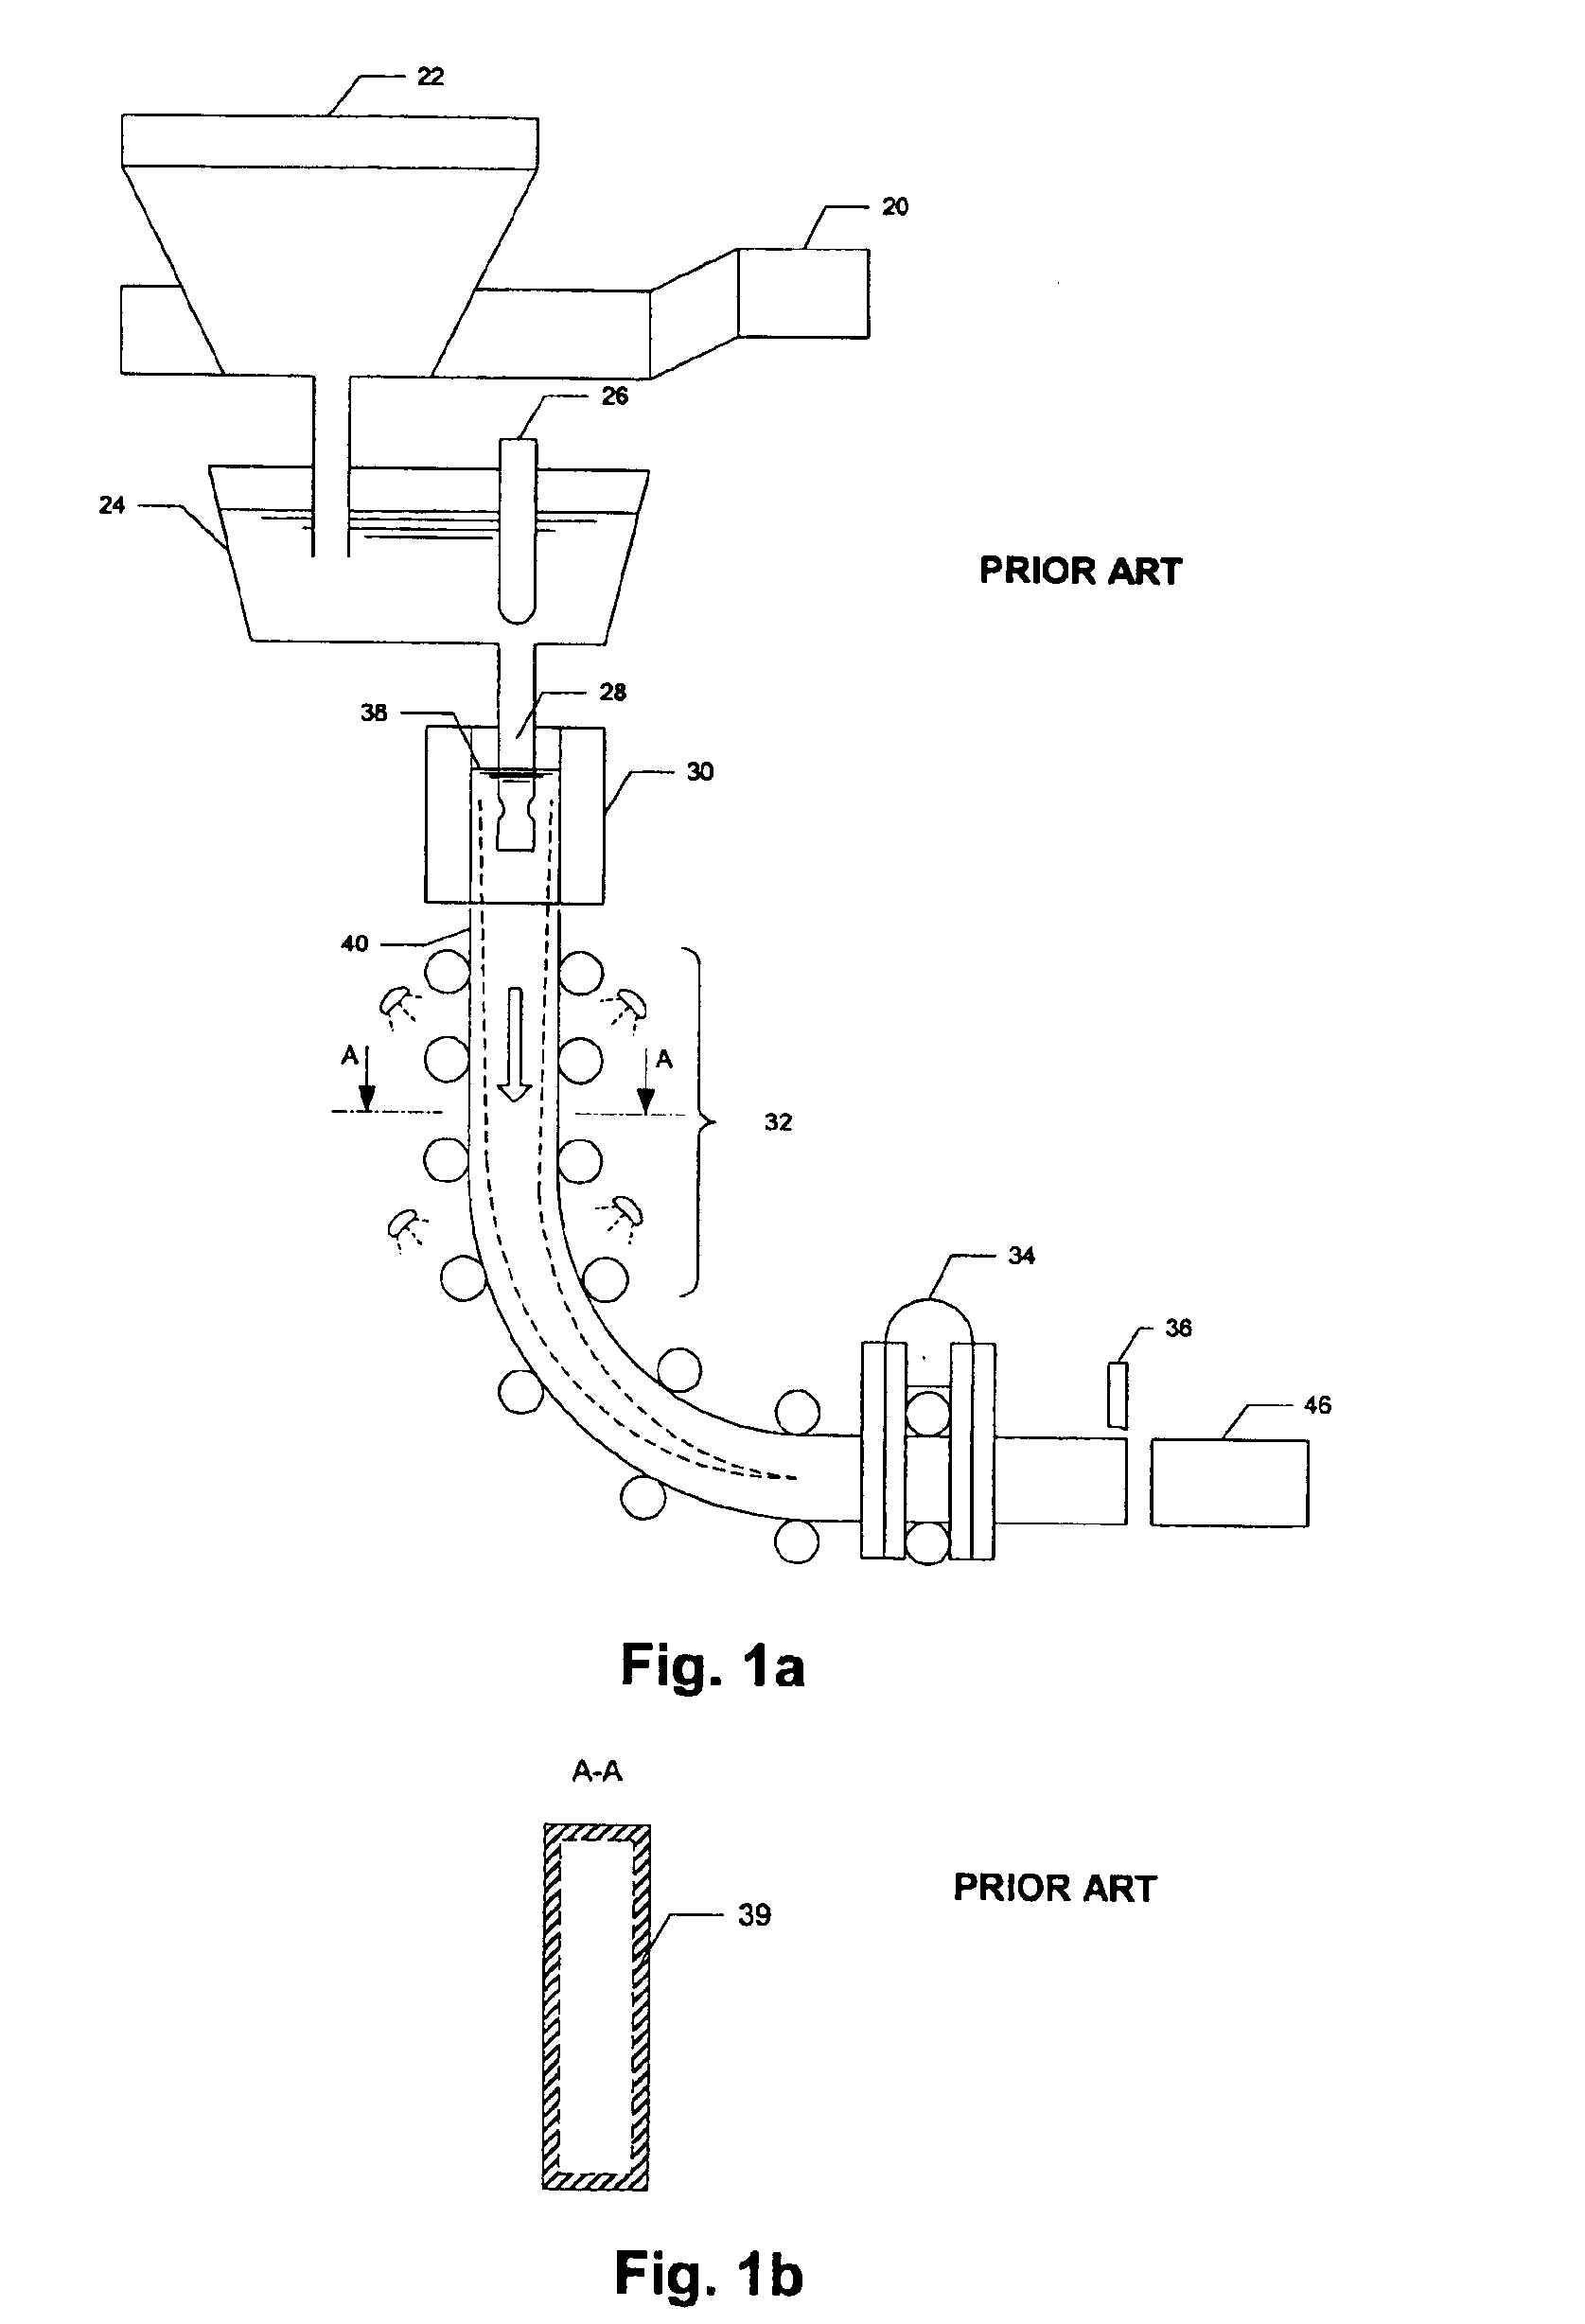 Real-time system and method of monitoring transient operations in continuous casting process for breakout prevention